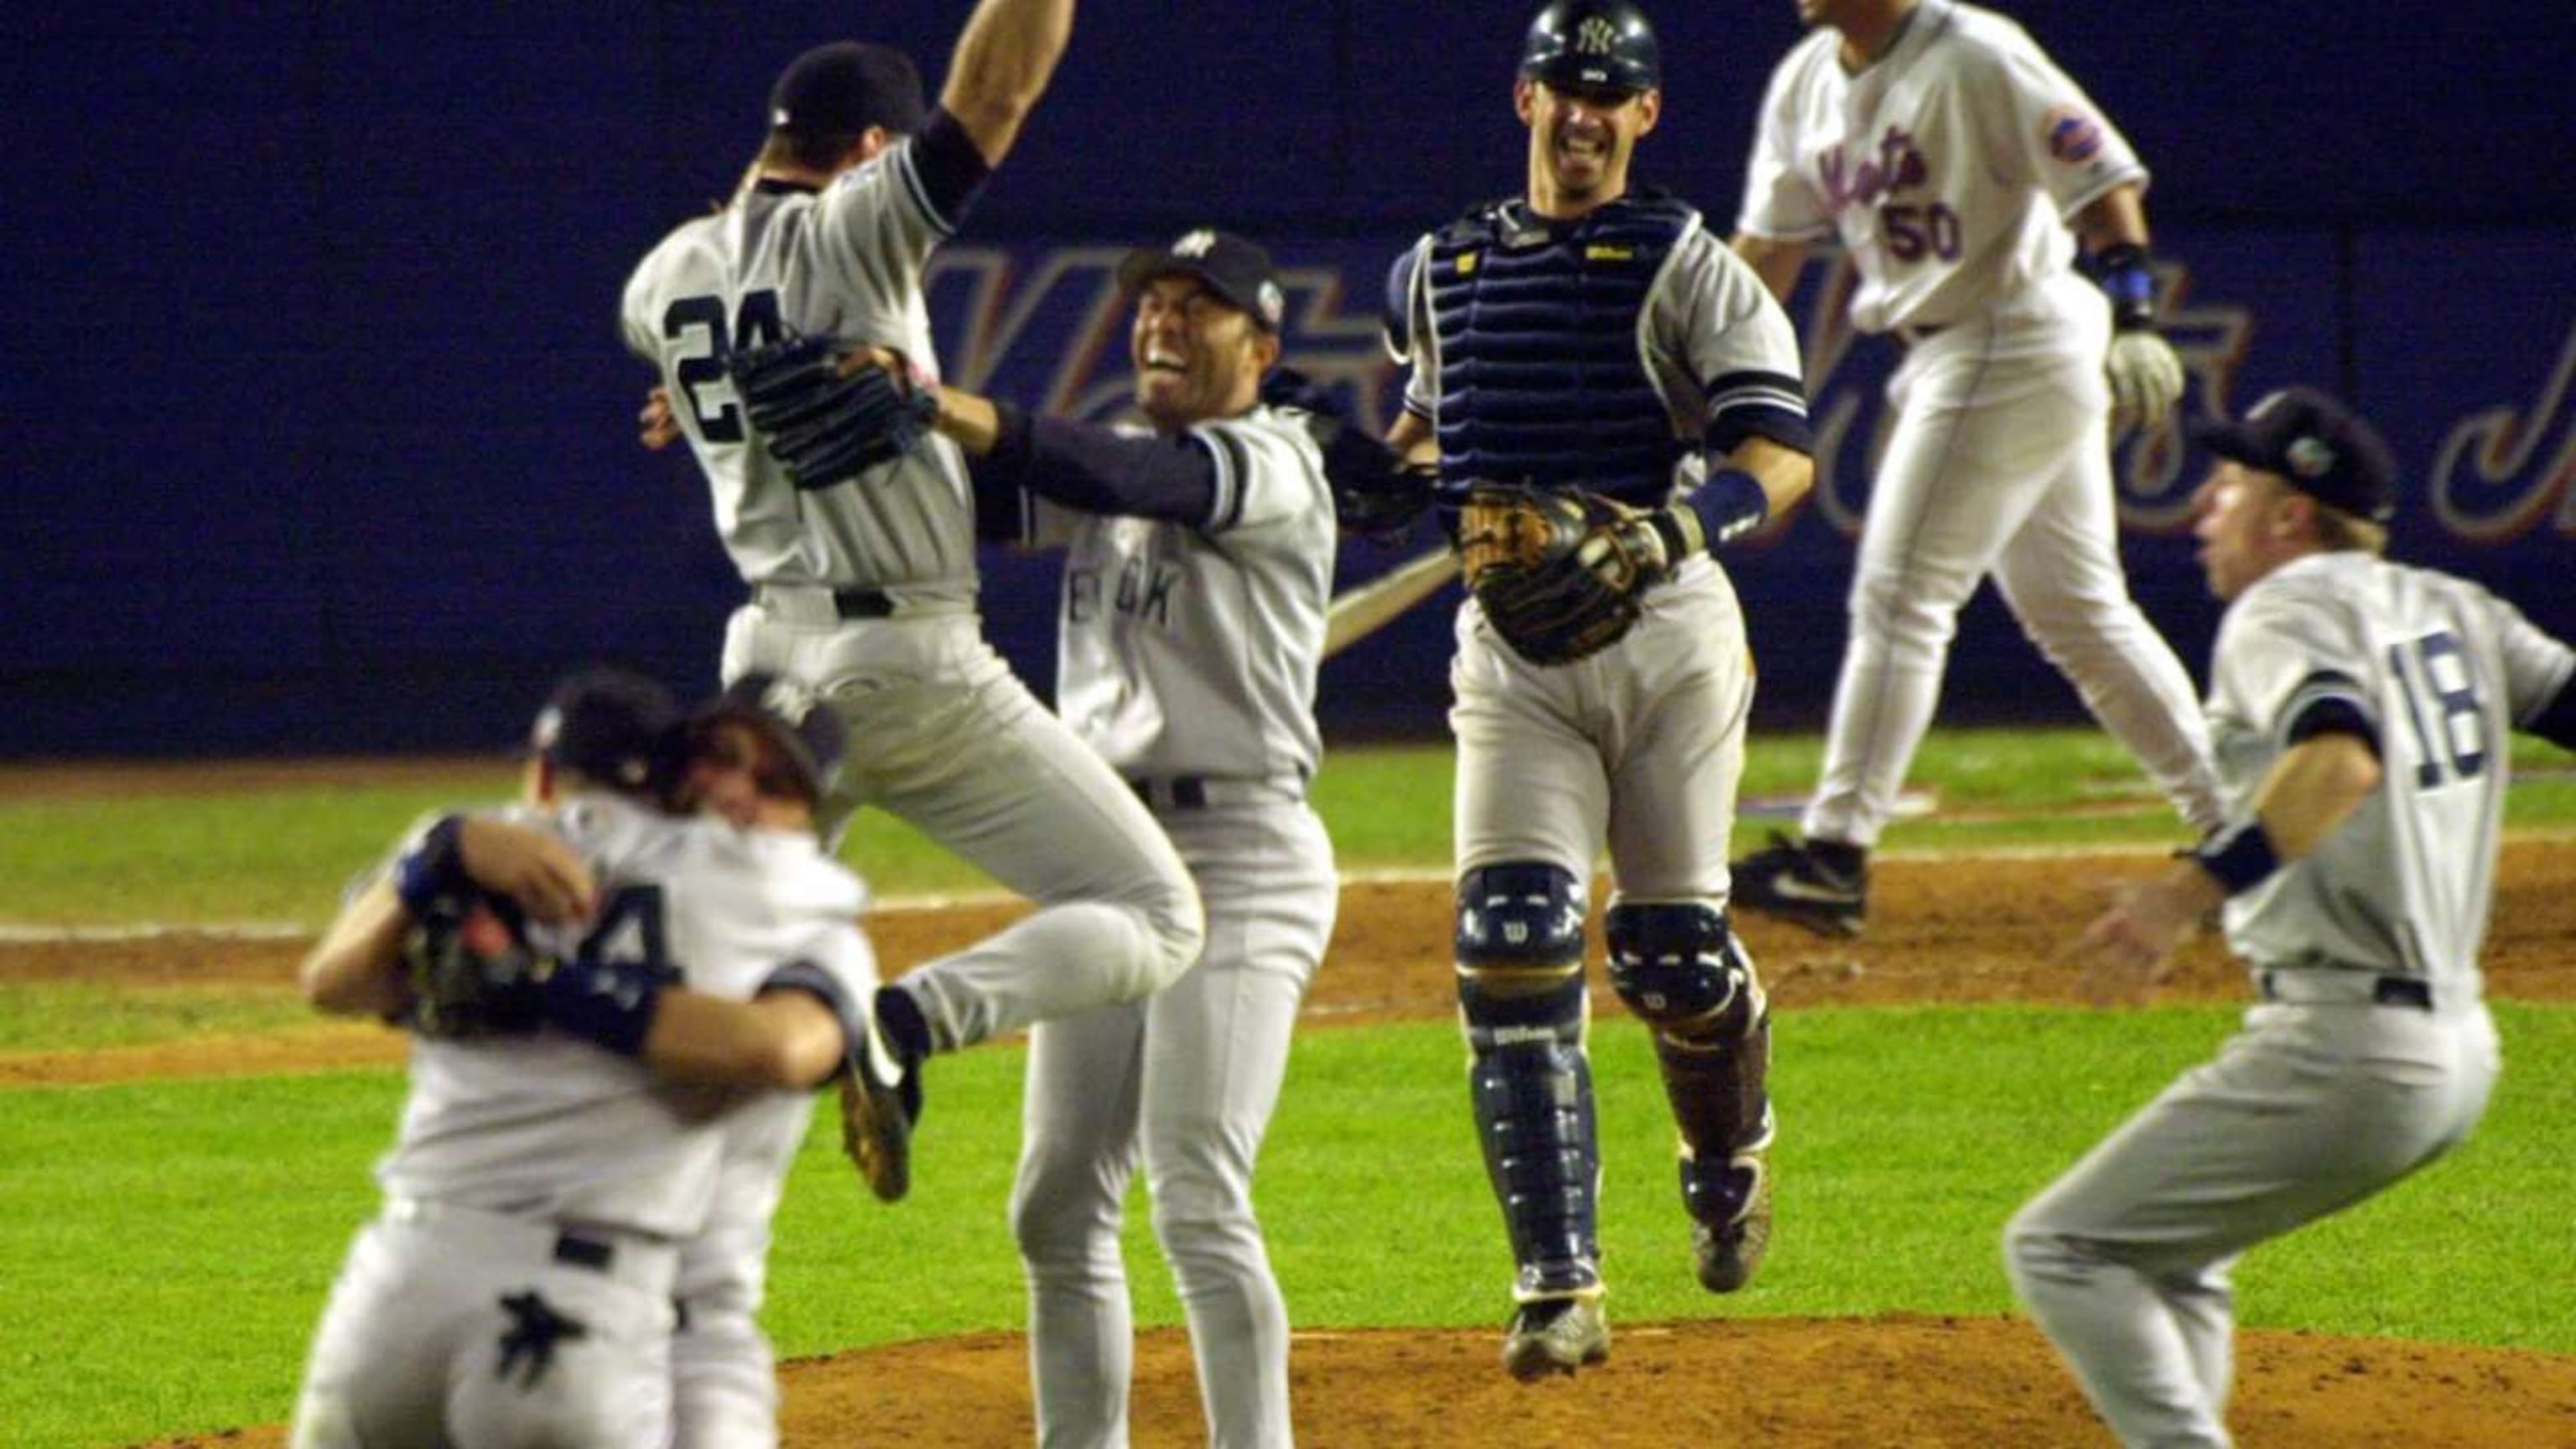 How NYC baseball collapsed in the '90s and came back from the brink